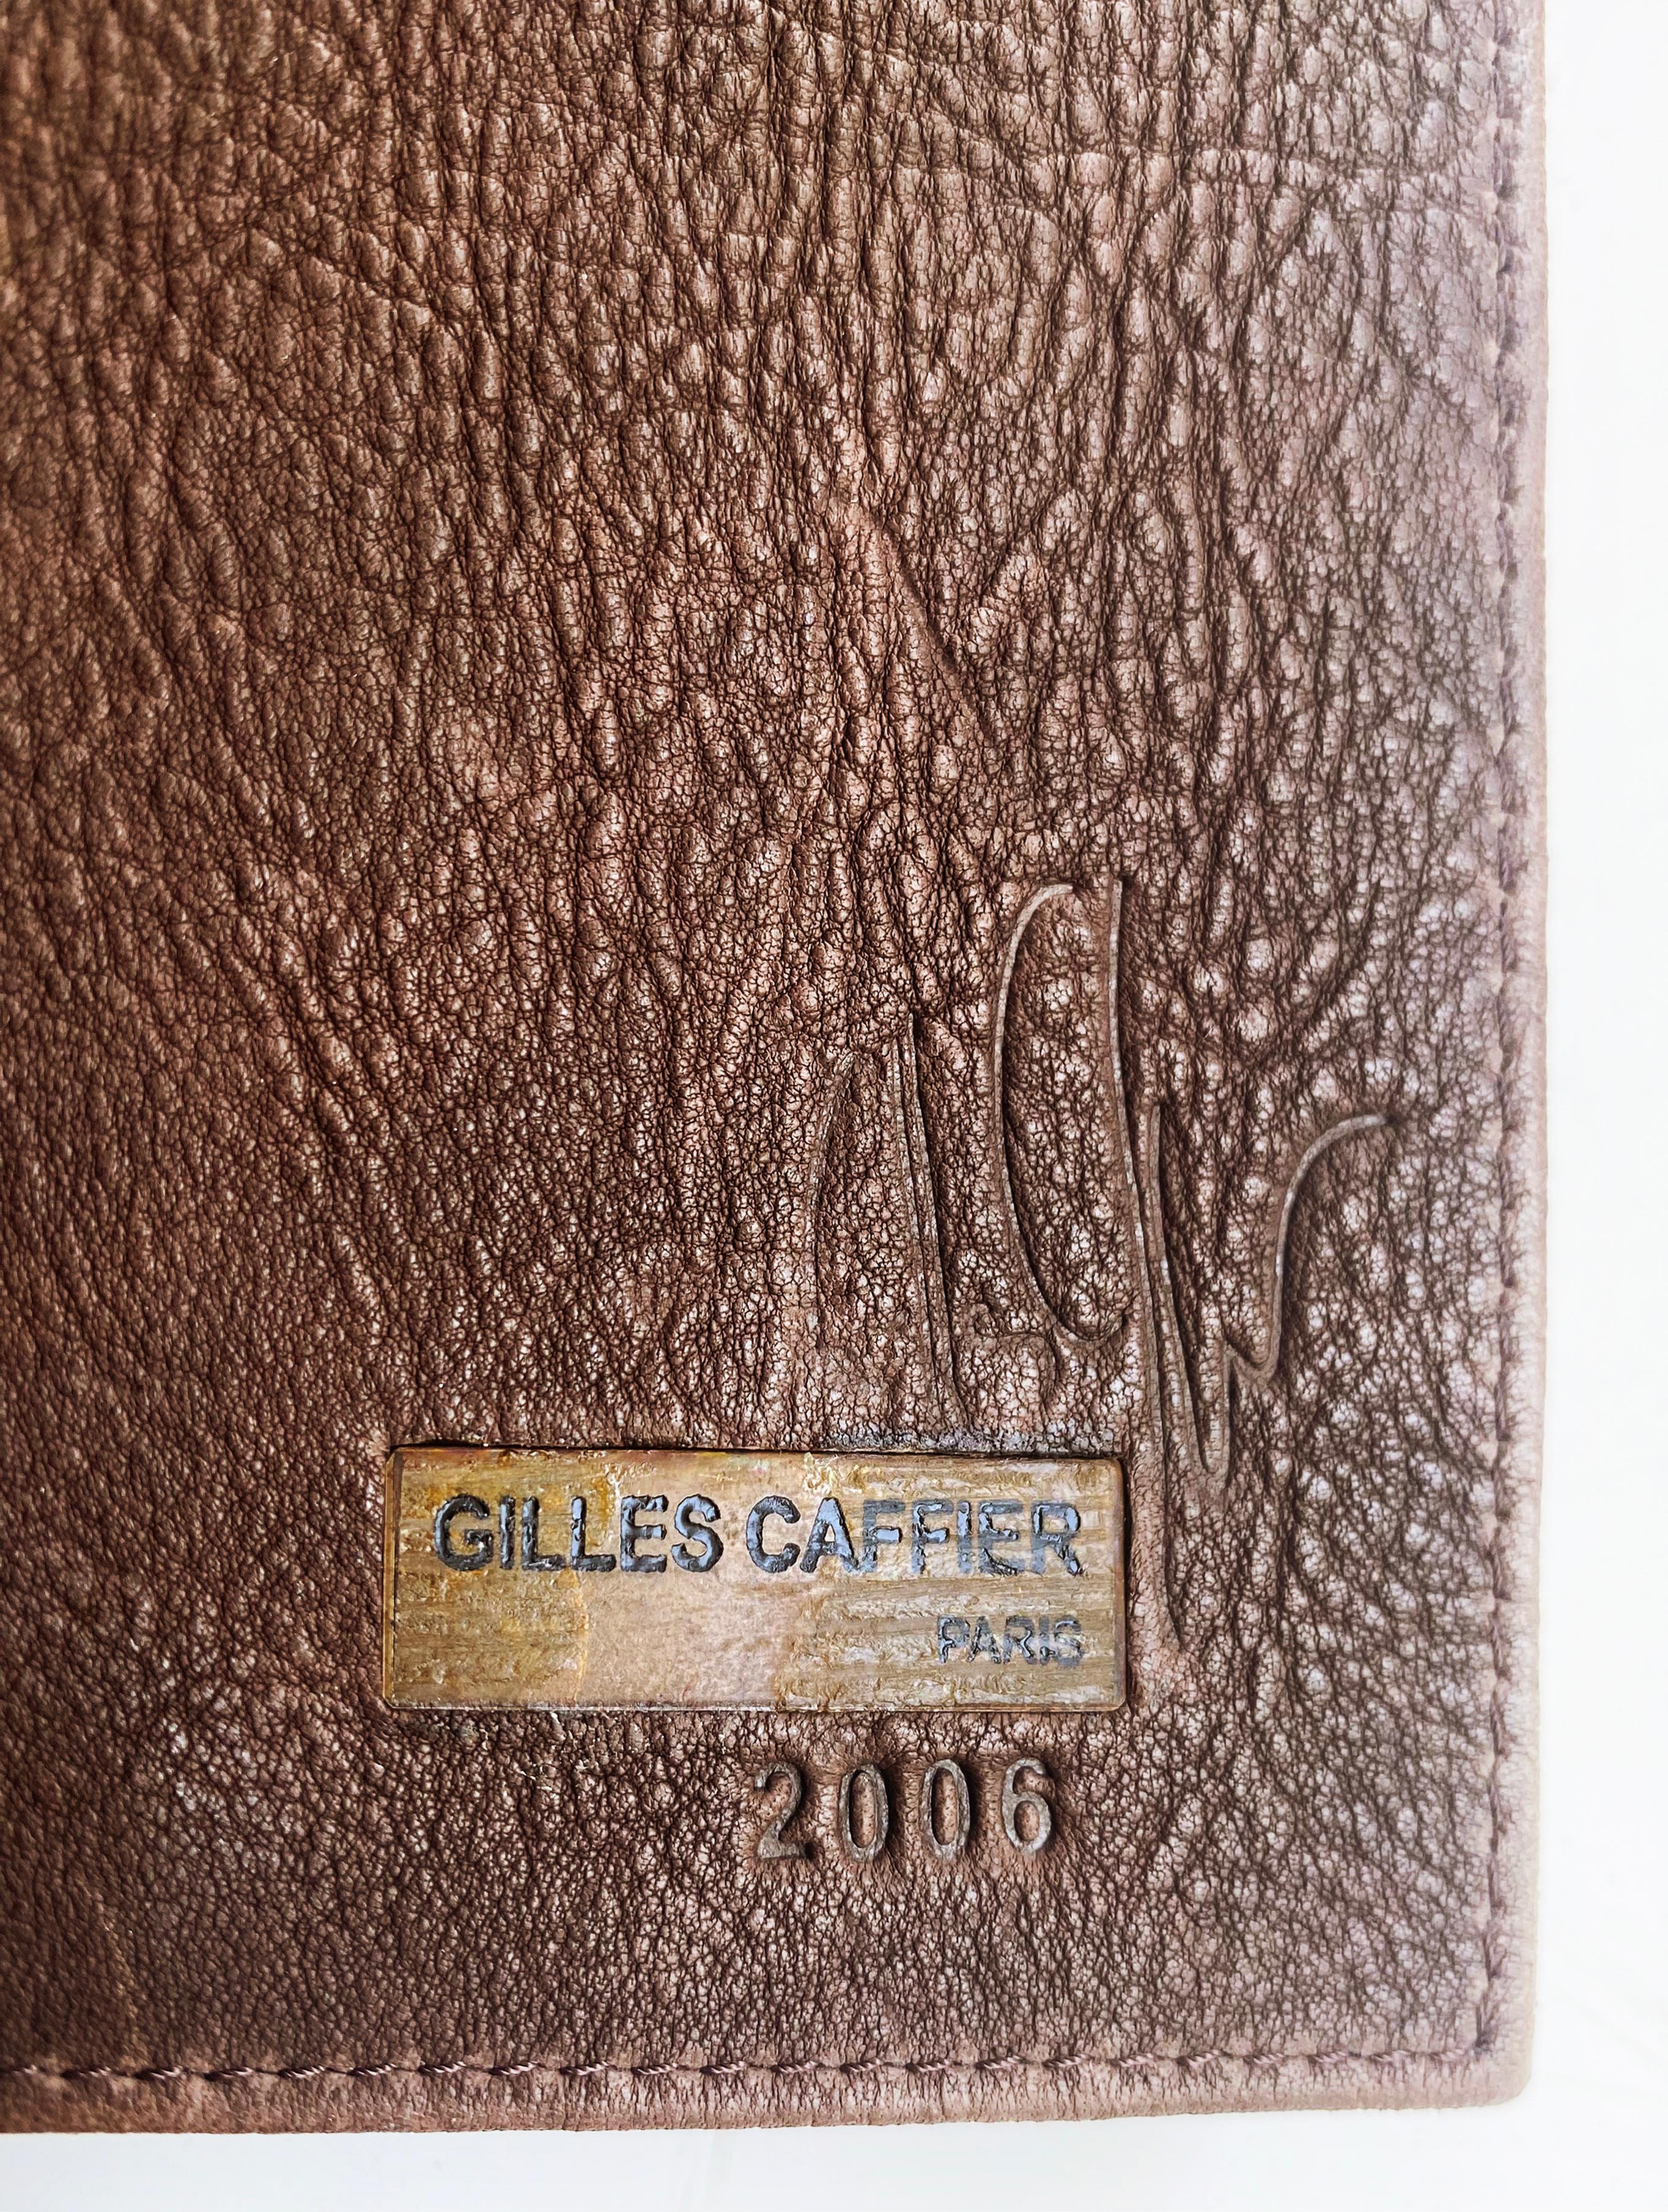 Gilles Caffier Leather Clad Vanity Tray Made in France 2006 1